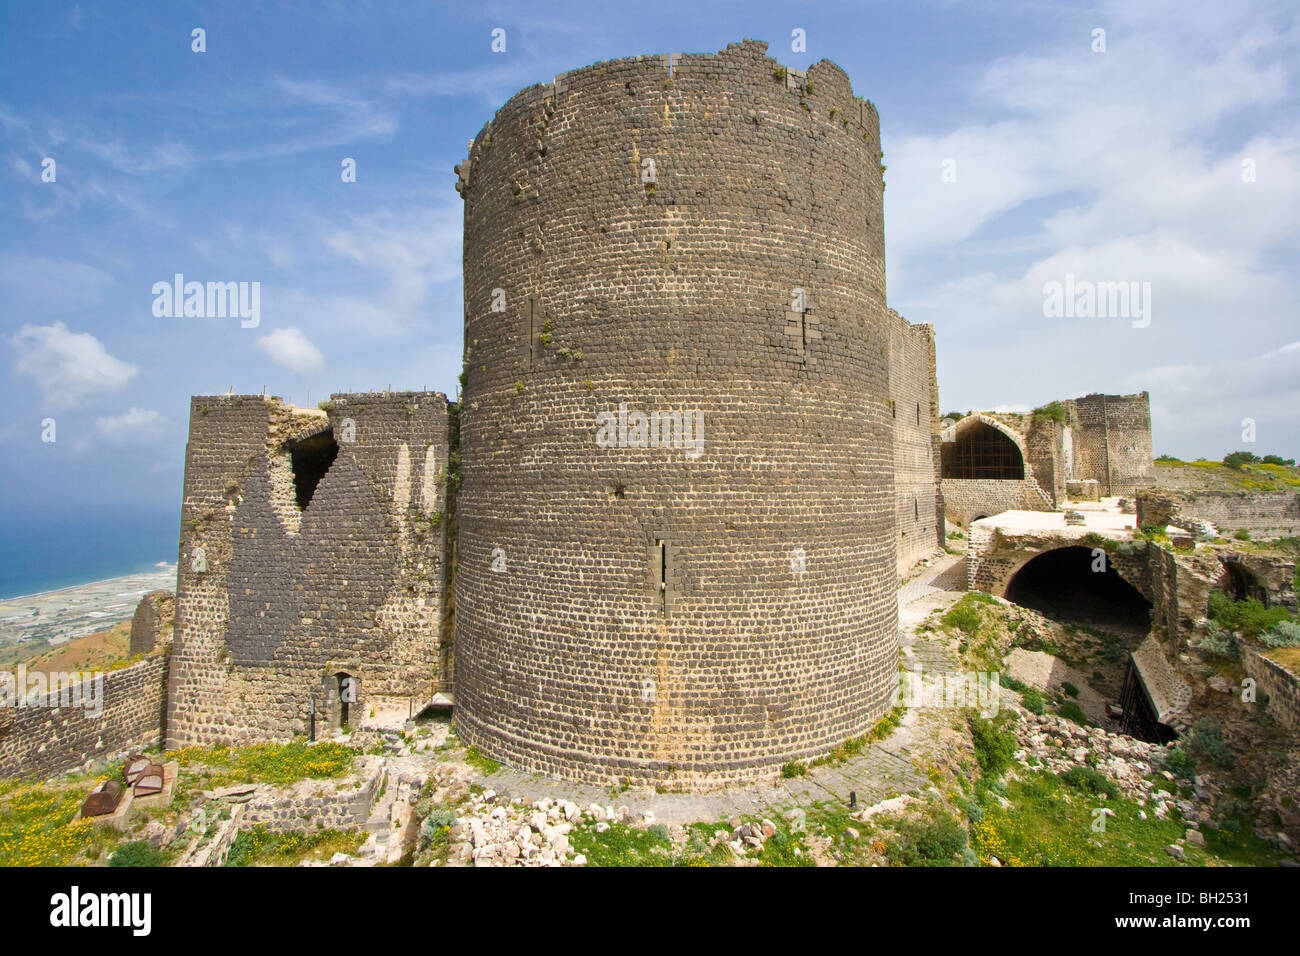 Qalaat Marqab Crusader Castle in Syria Stock Photo